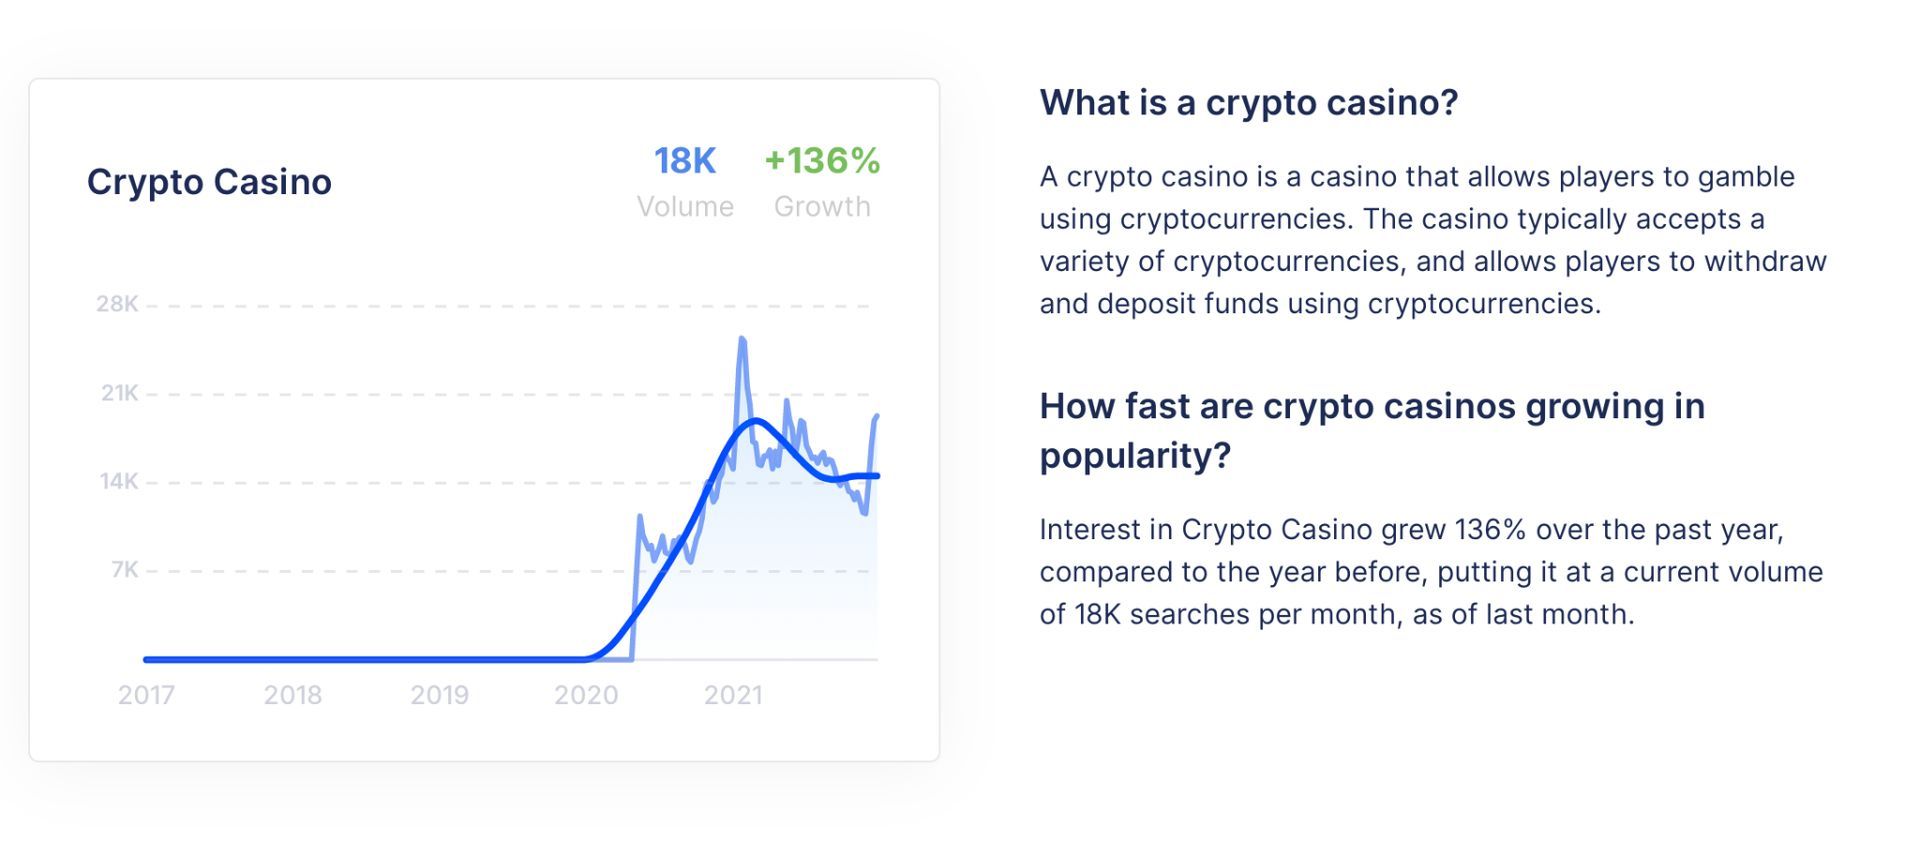 Digital currencies are changing online casino banking and payments